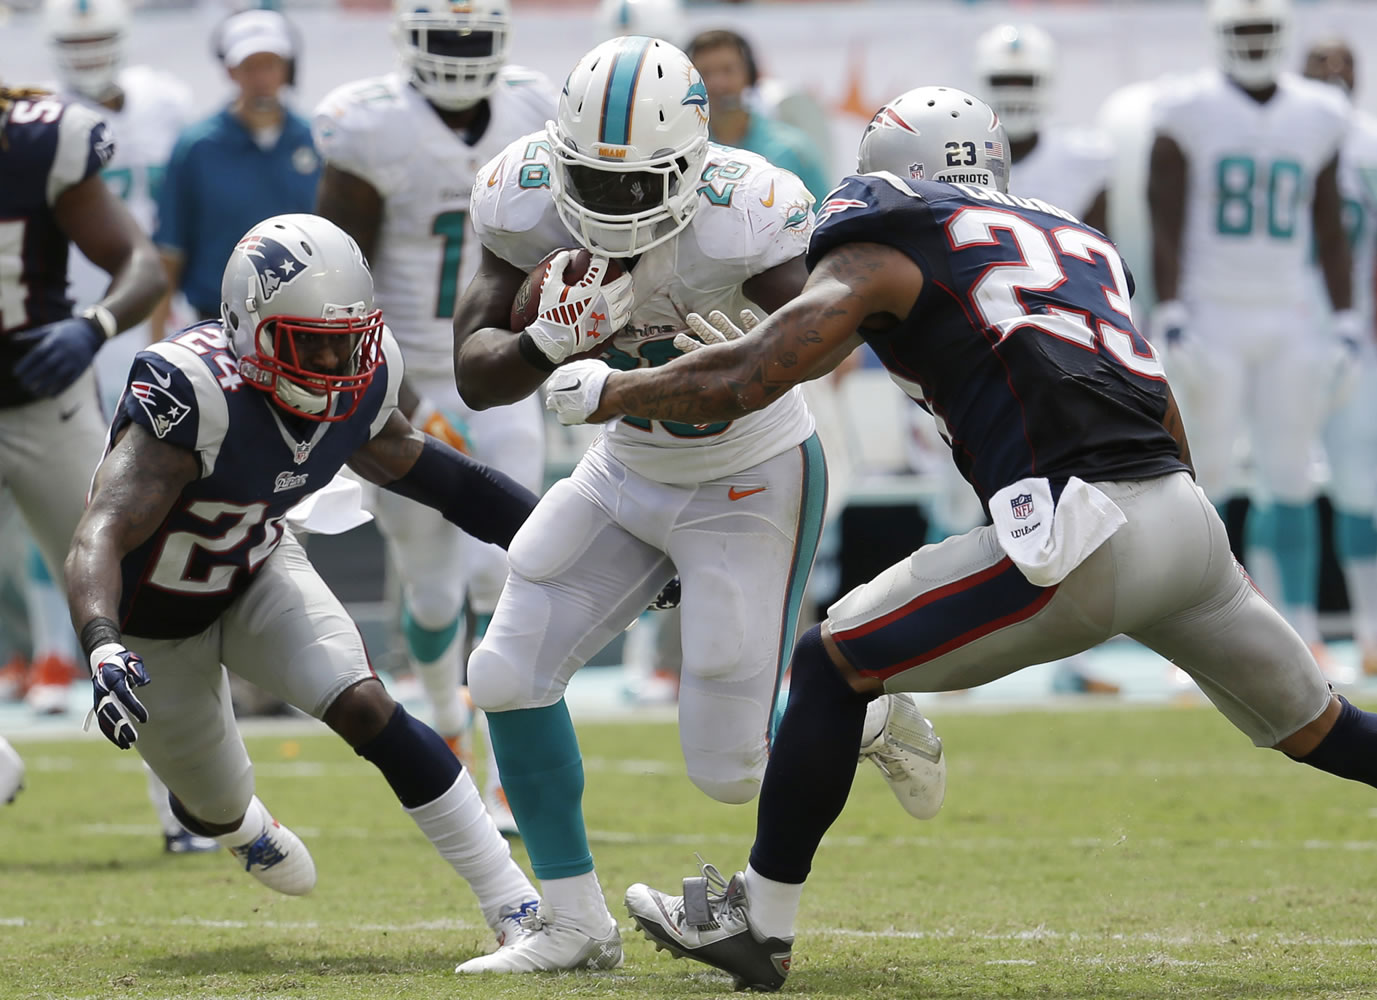 New England Patriots cornerback Darrelle Revis (24) and free safety Patrick Chung (23) attempt to tackle Miami Dolphins running back Knowshon Moreno (28) during the second half, Sunday Sept. 7, 2014. The Dolphins defeated the Patriots 33-20.